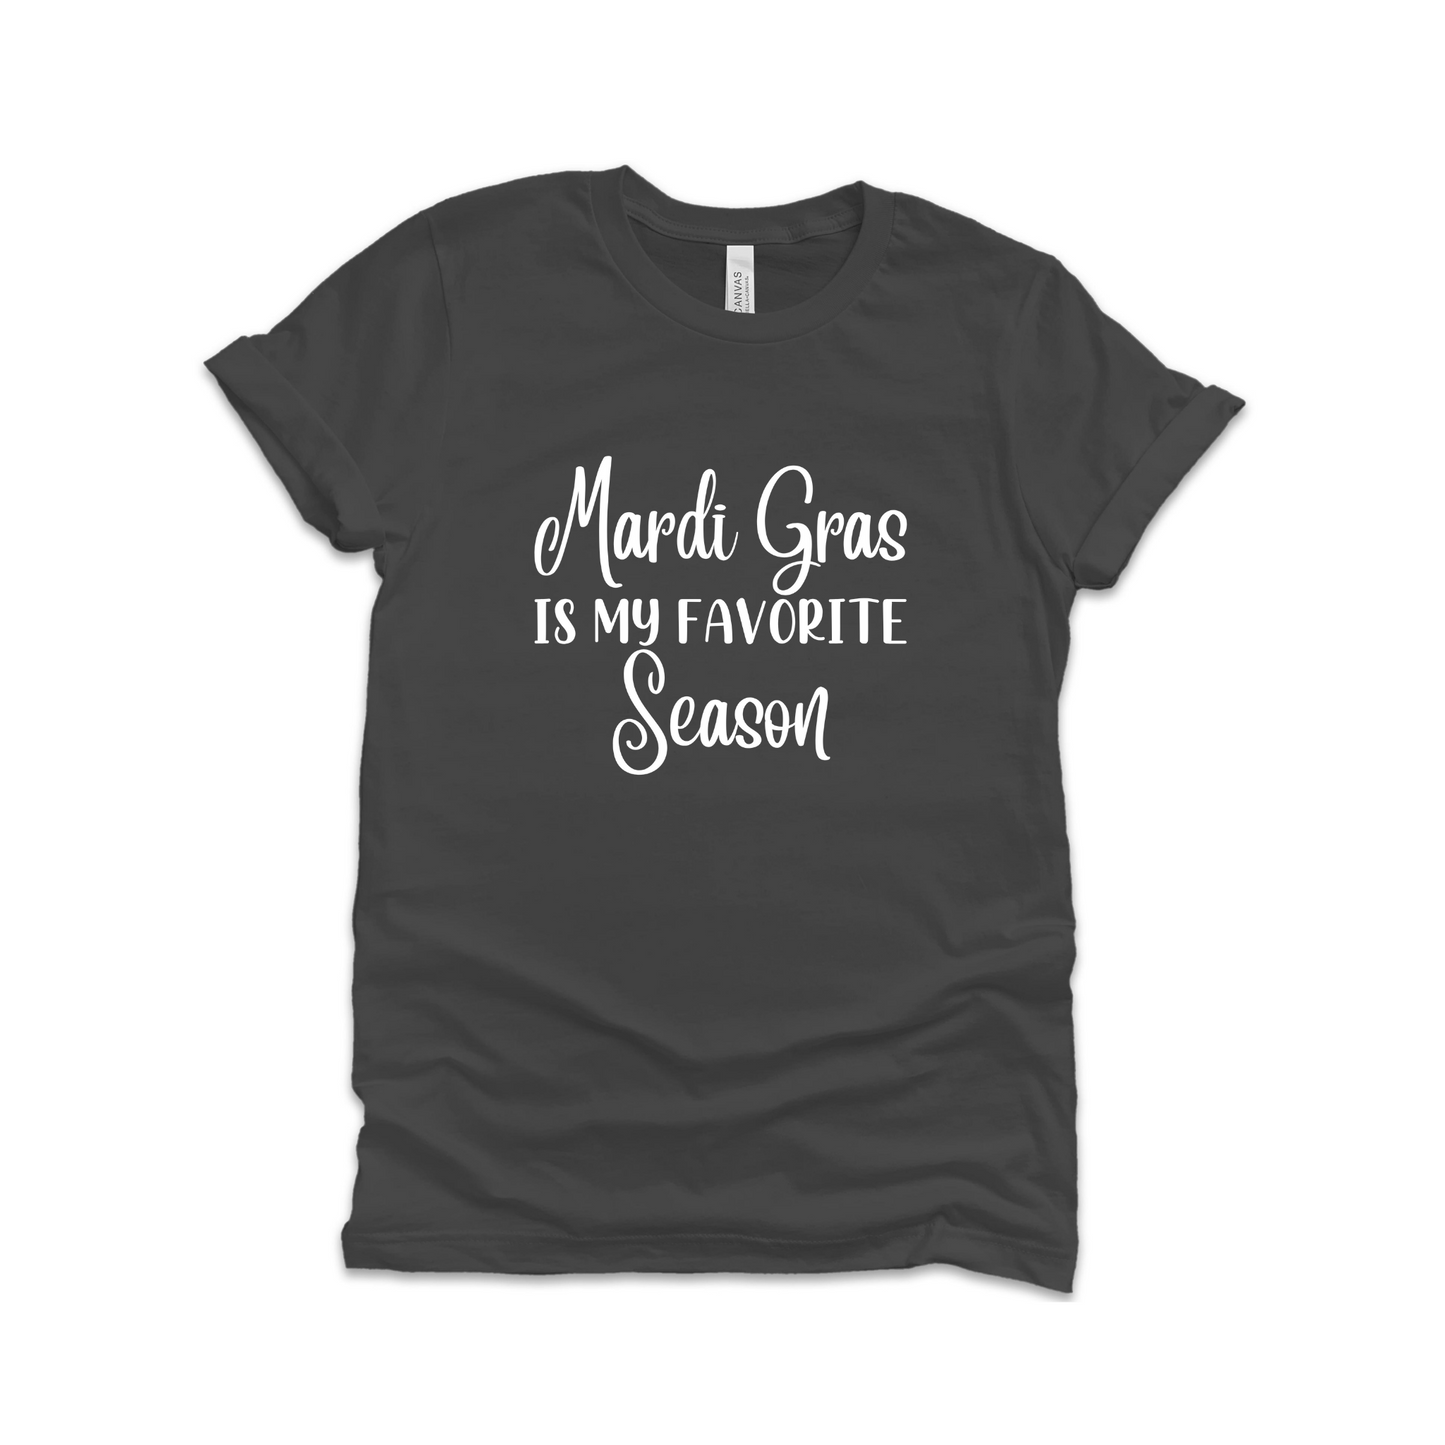 Grey t-shirt with white print that says Mardi Gras is my favorite season. Grey tshirt with white writing on white background.